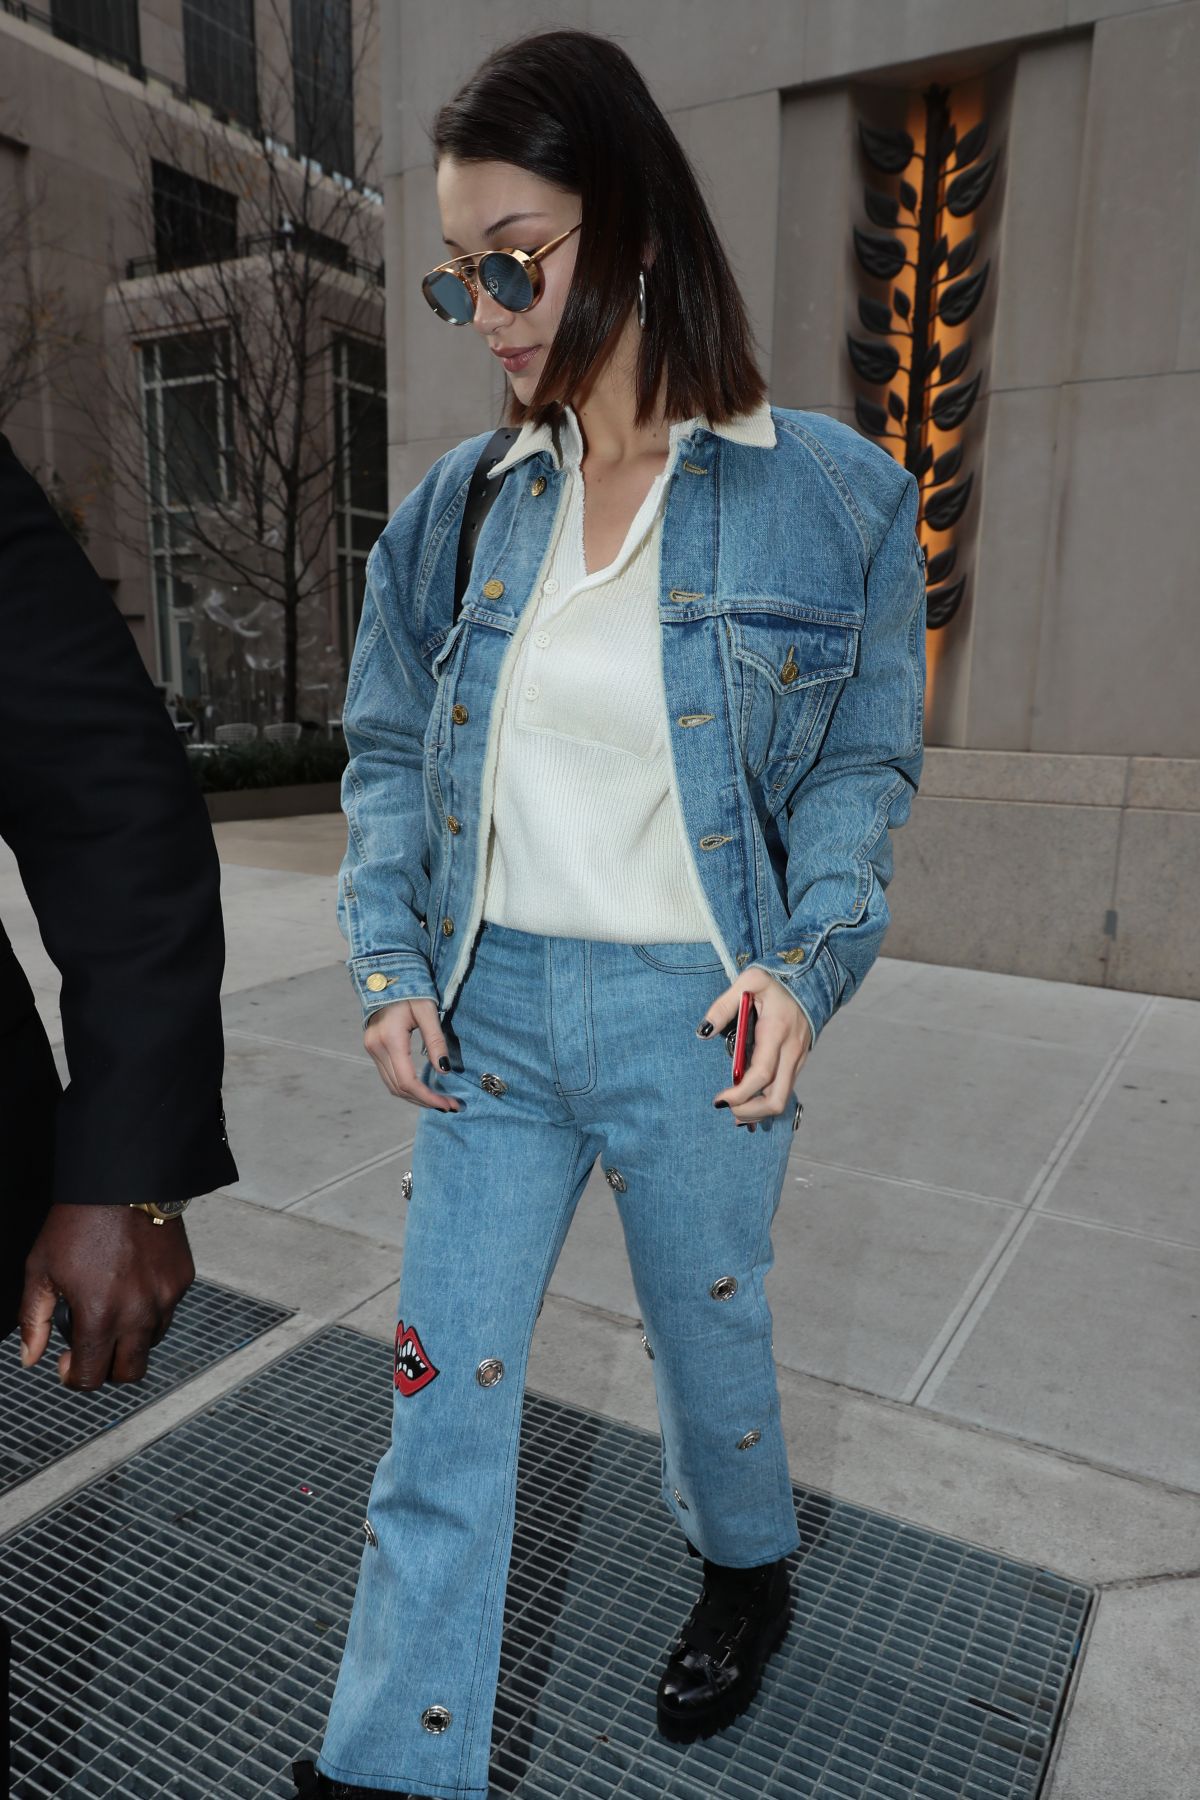 BELLA HADID in Denim Out and About in New York 11/14/2017 – HawtCelebs